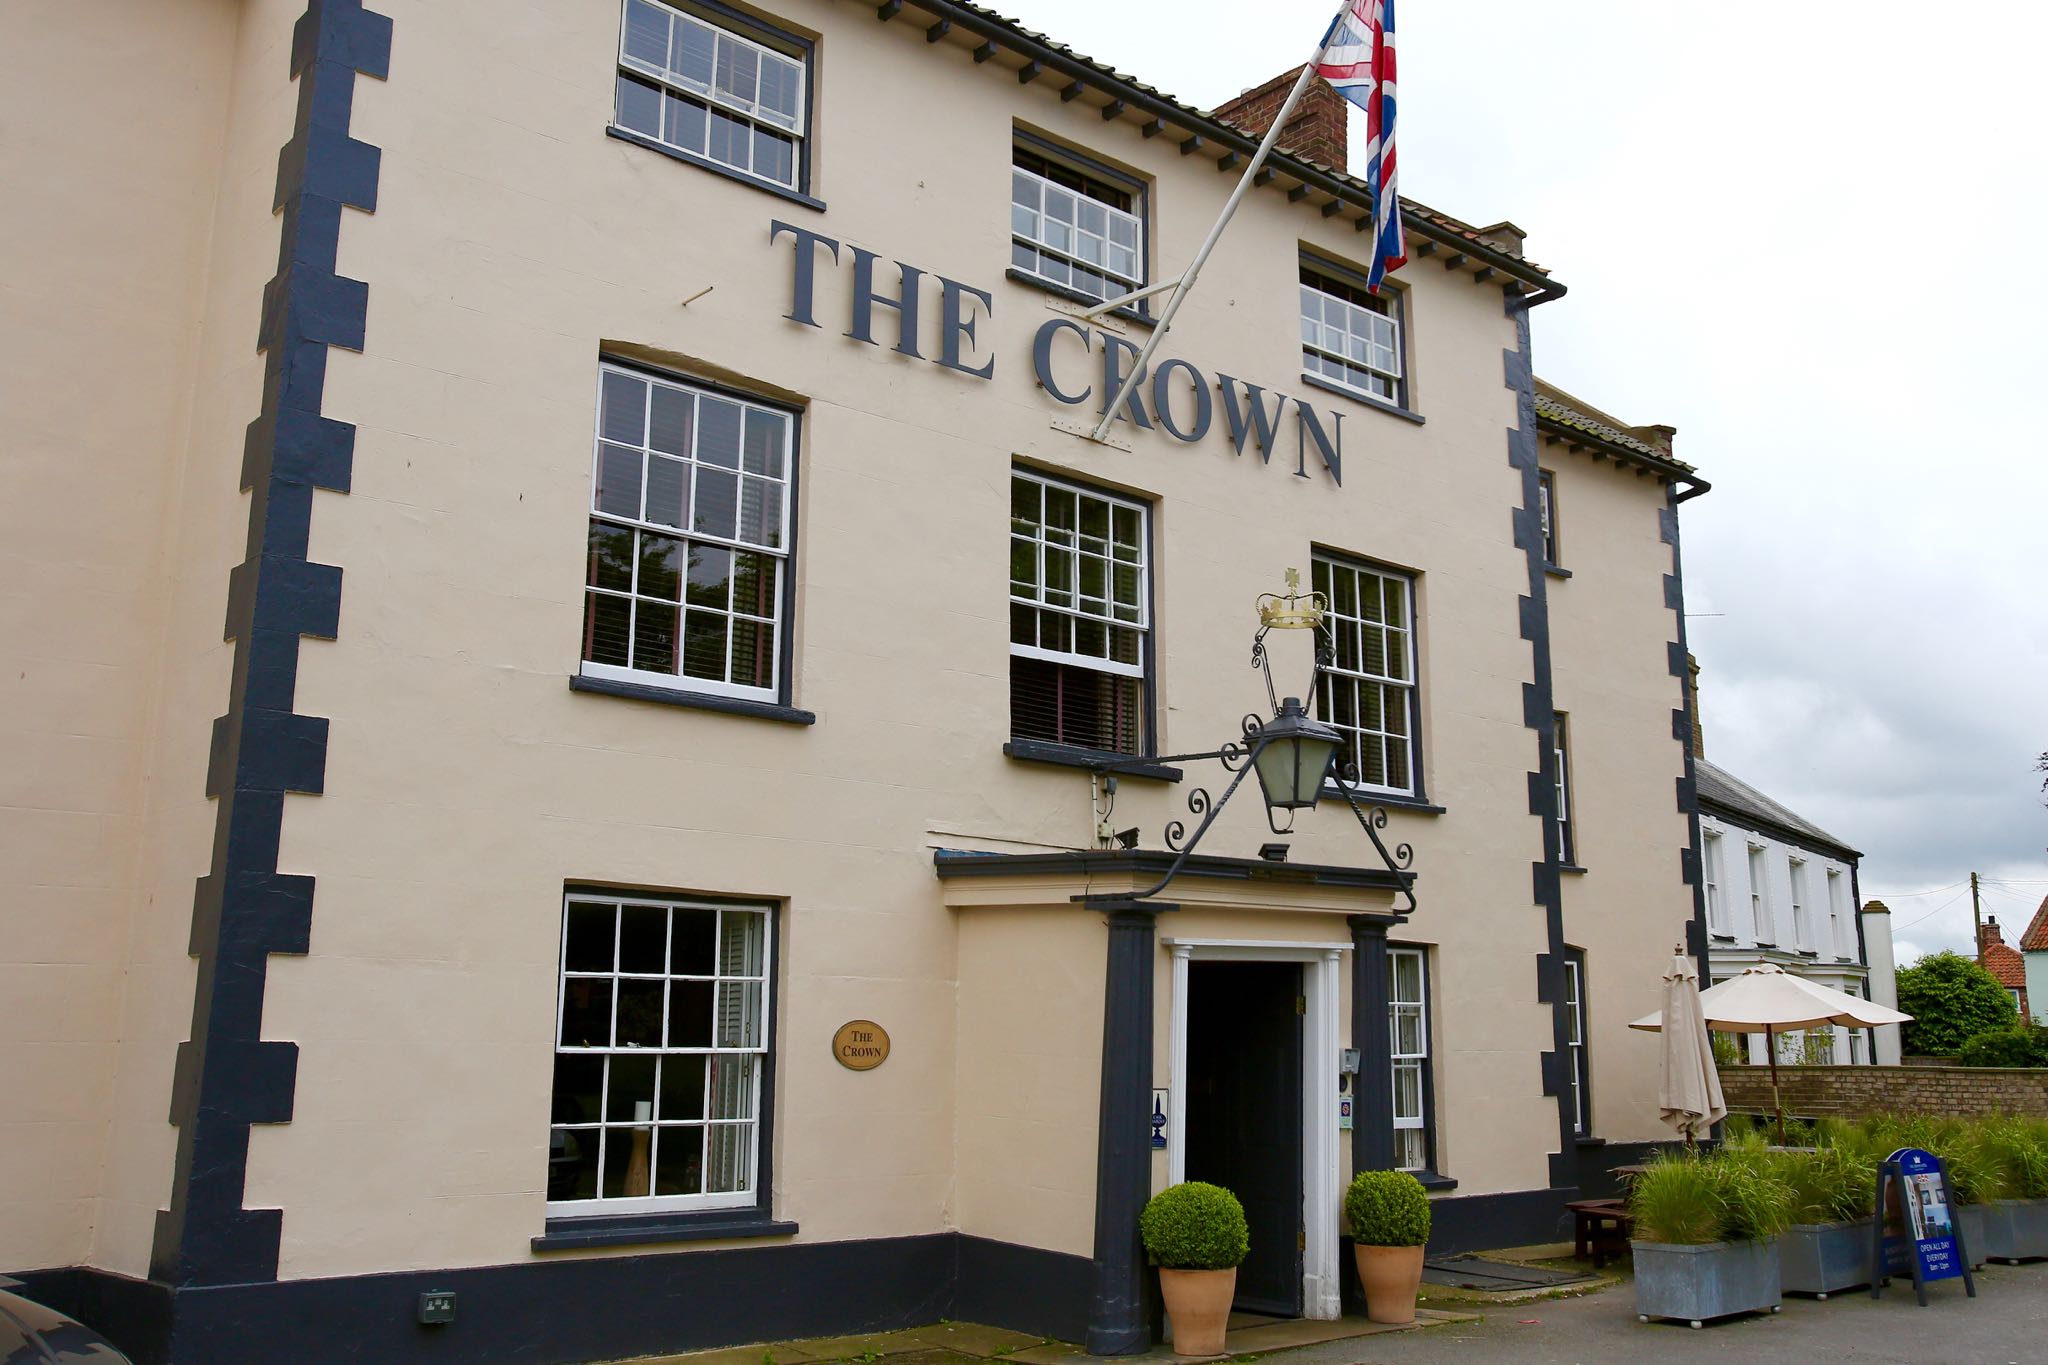 The Crown Hotel, Wells-Next-The-Sea